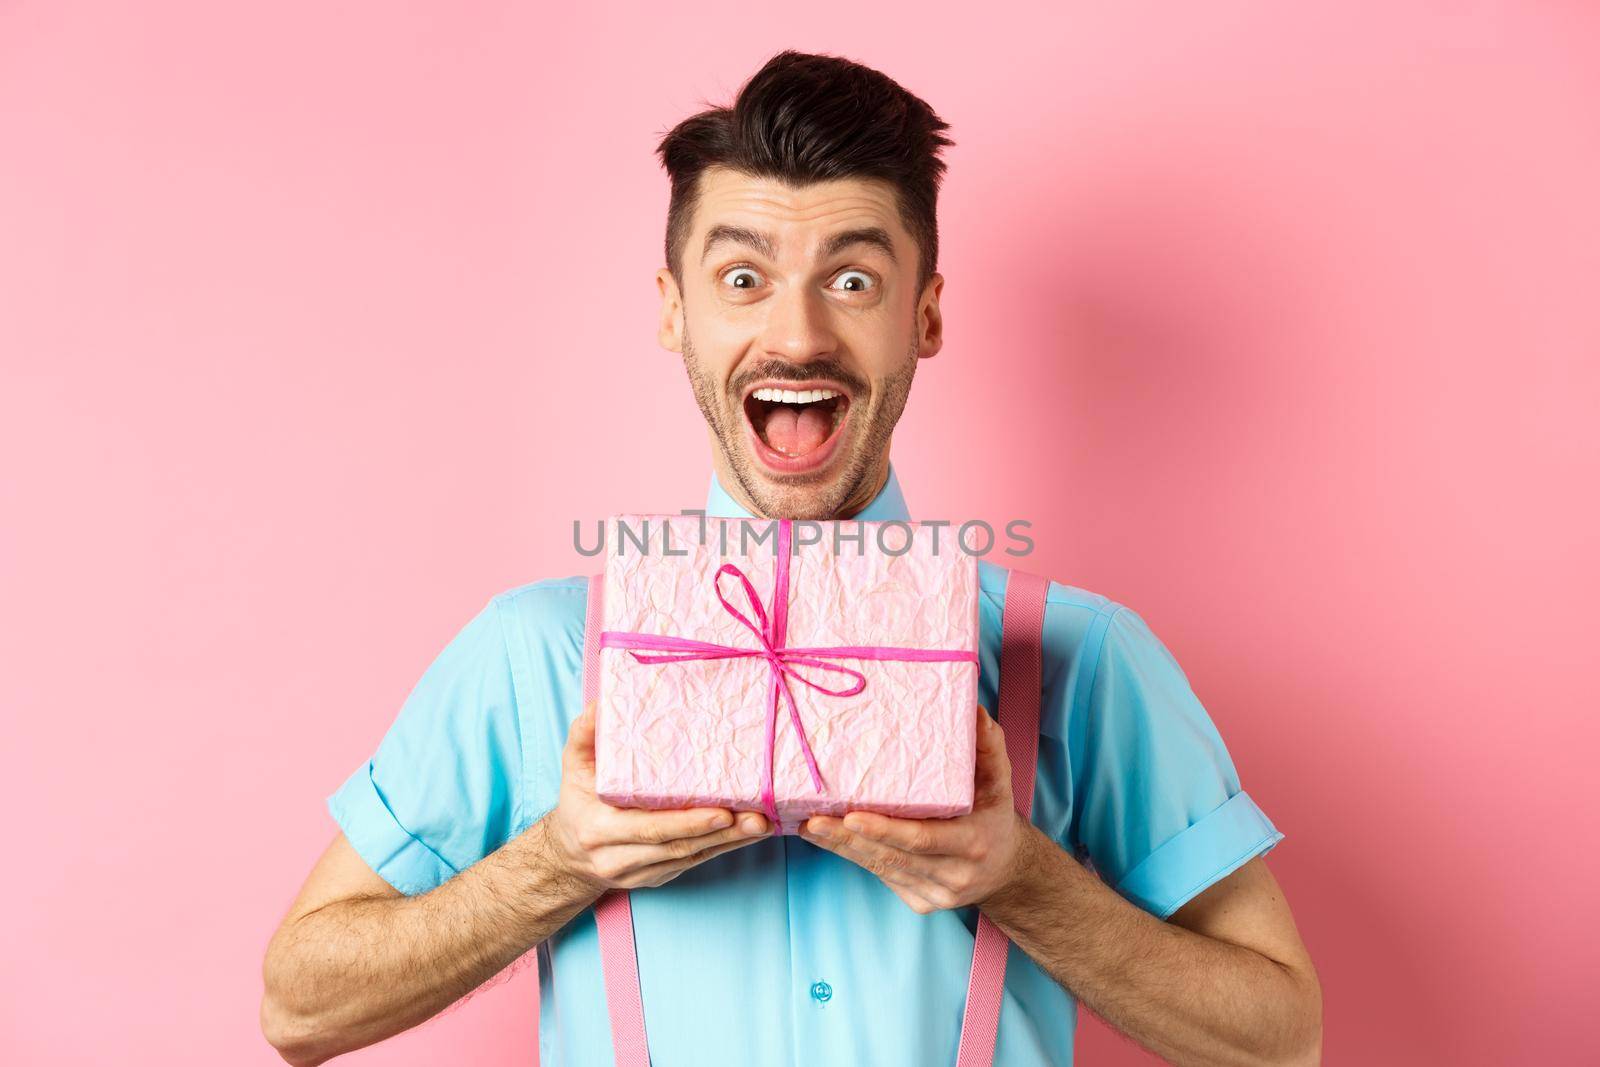 Holidays and celebration concept. Excited and surprised guy celebrating birthday, receiving gift and cheering, smiling happy at camera, standing over pink background.